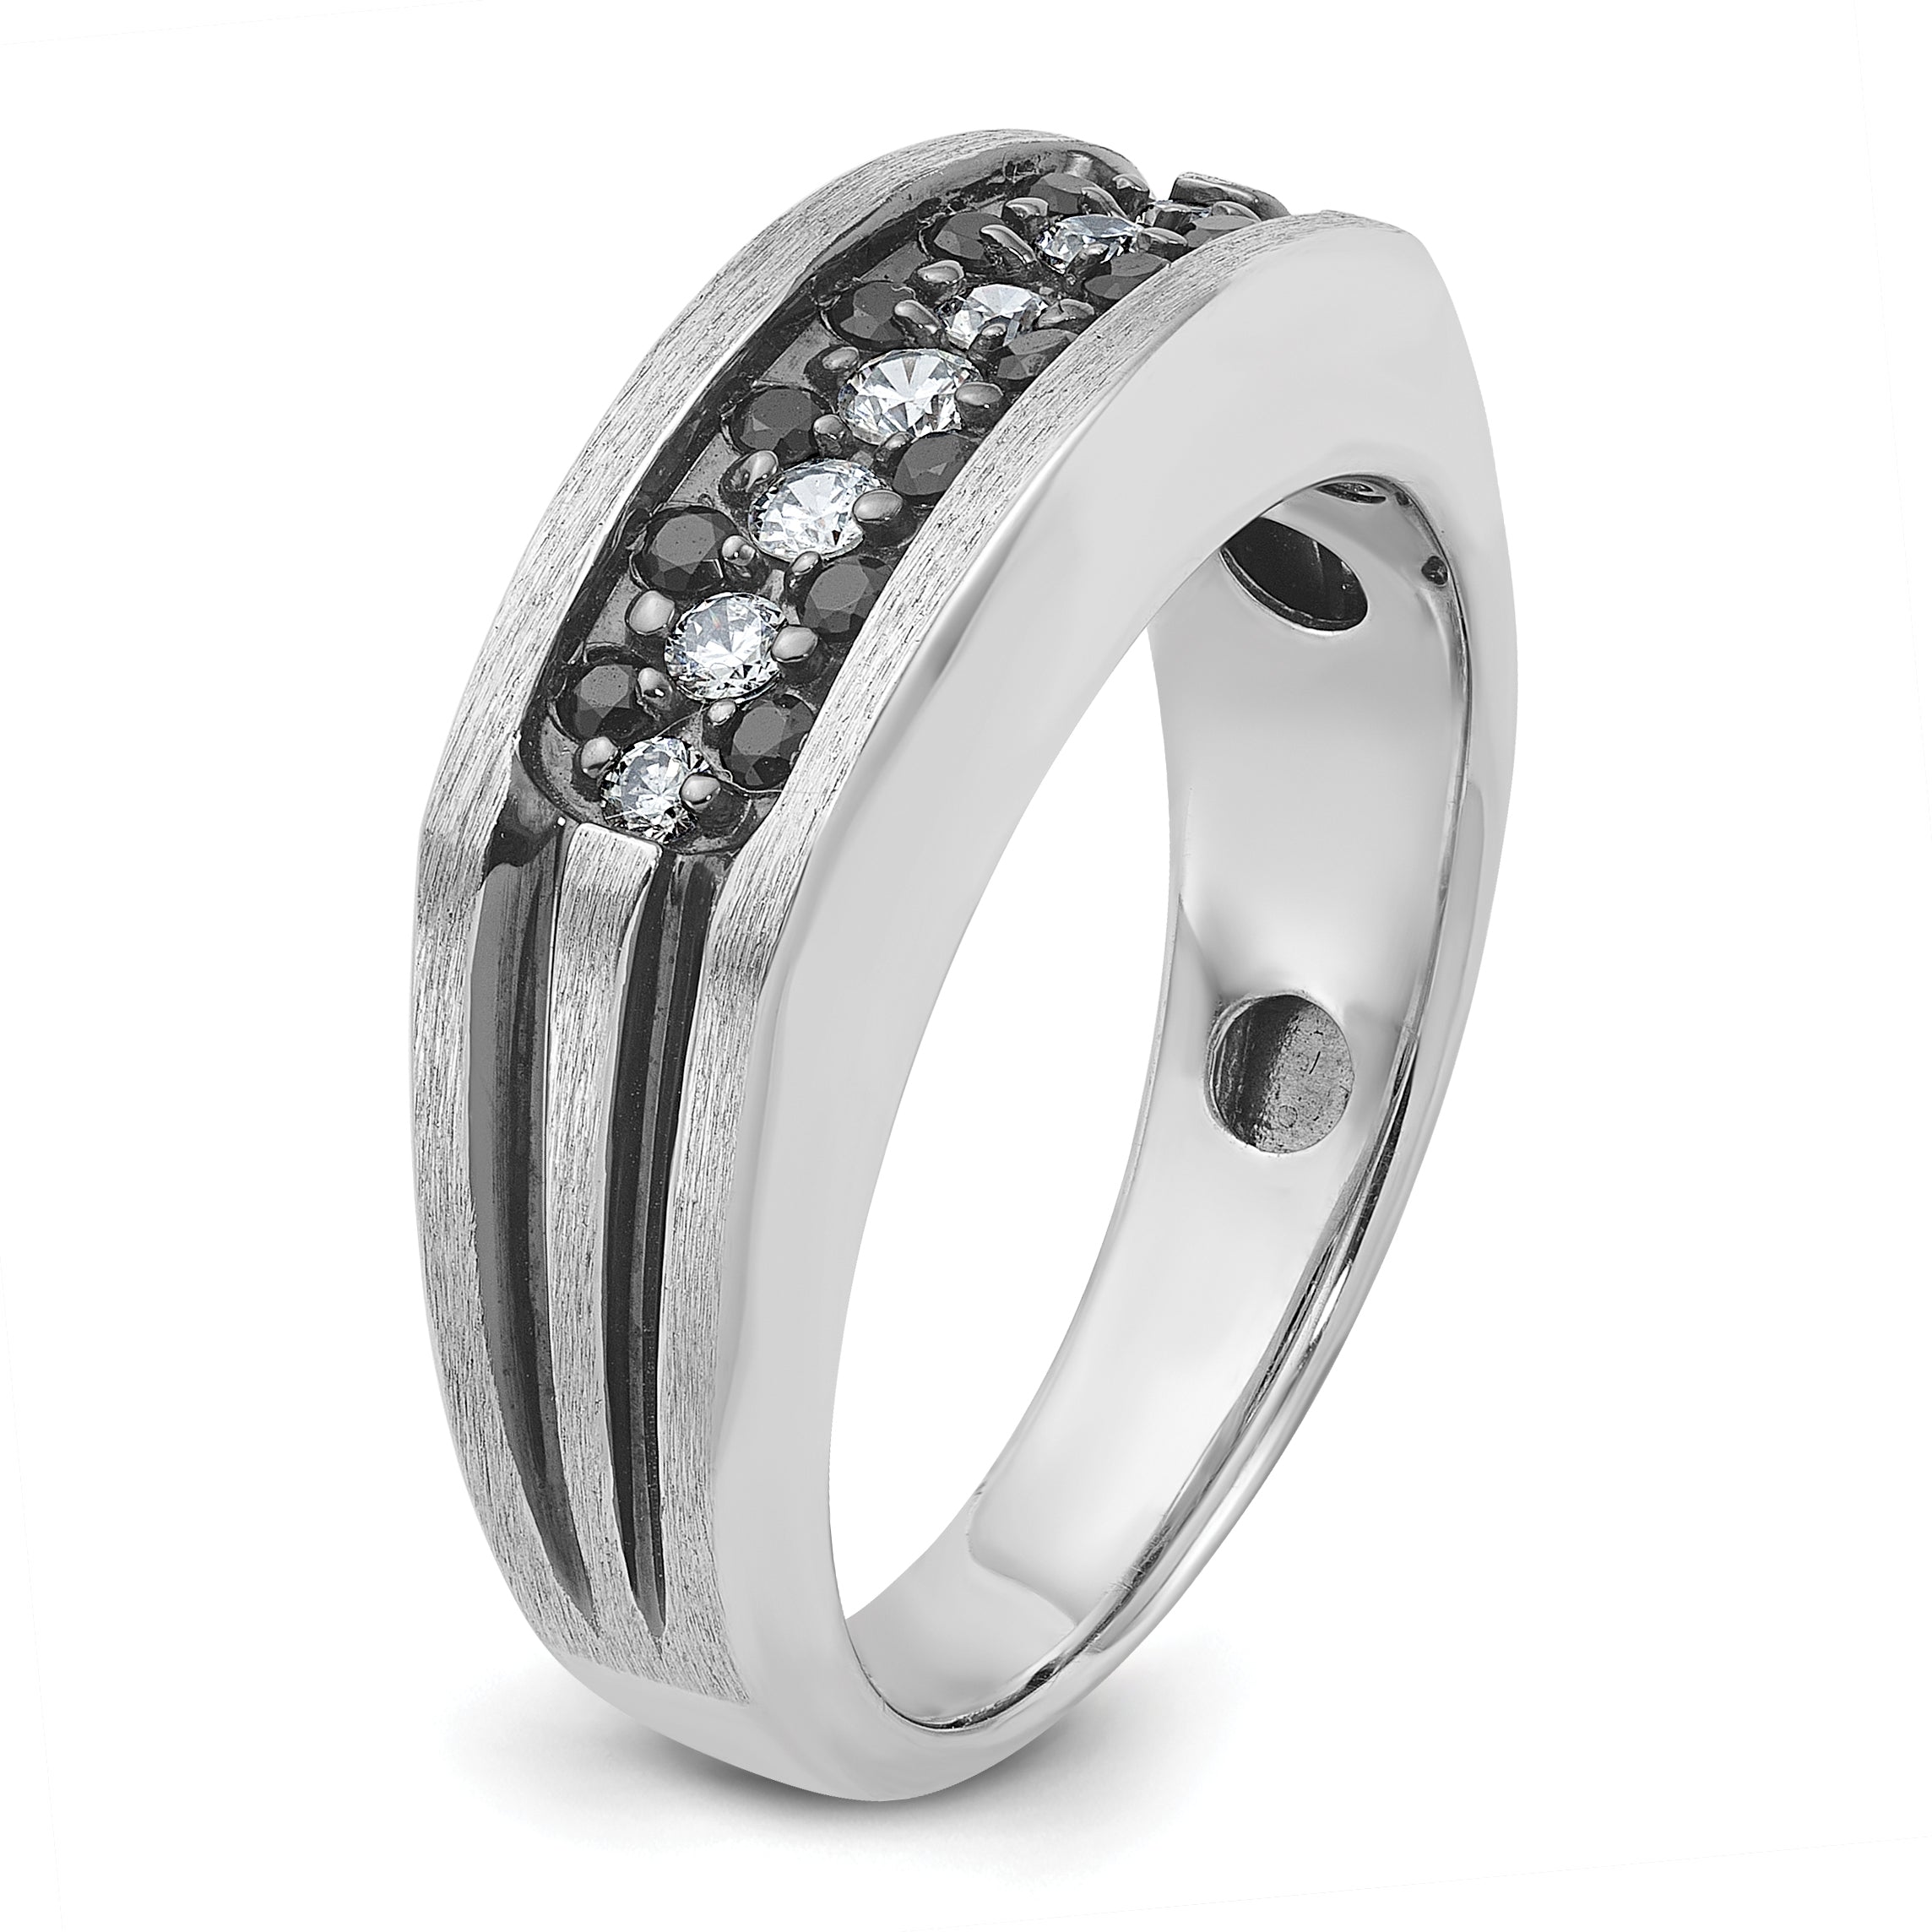 IBGoodman 10k White Gold with Black Rhodium Men's Polished Satin and Grooved 1/2 Carat A Quality Black and White Diamond Ring